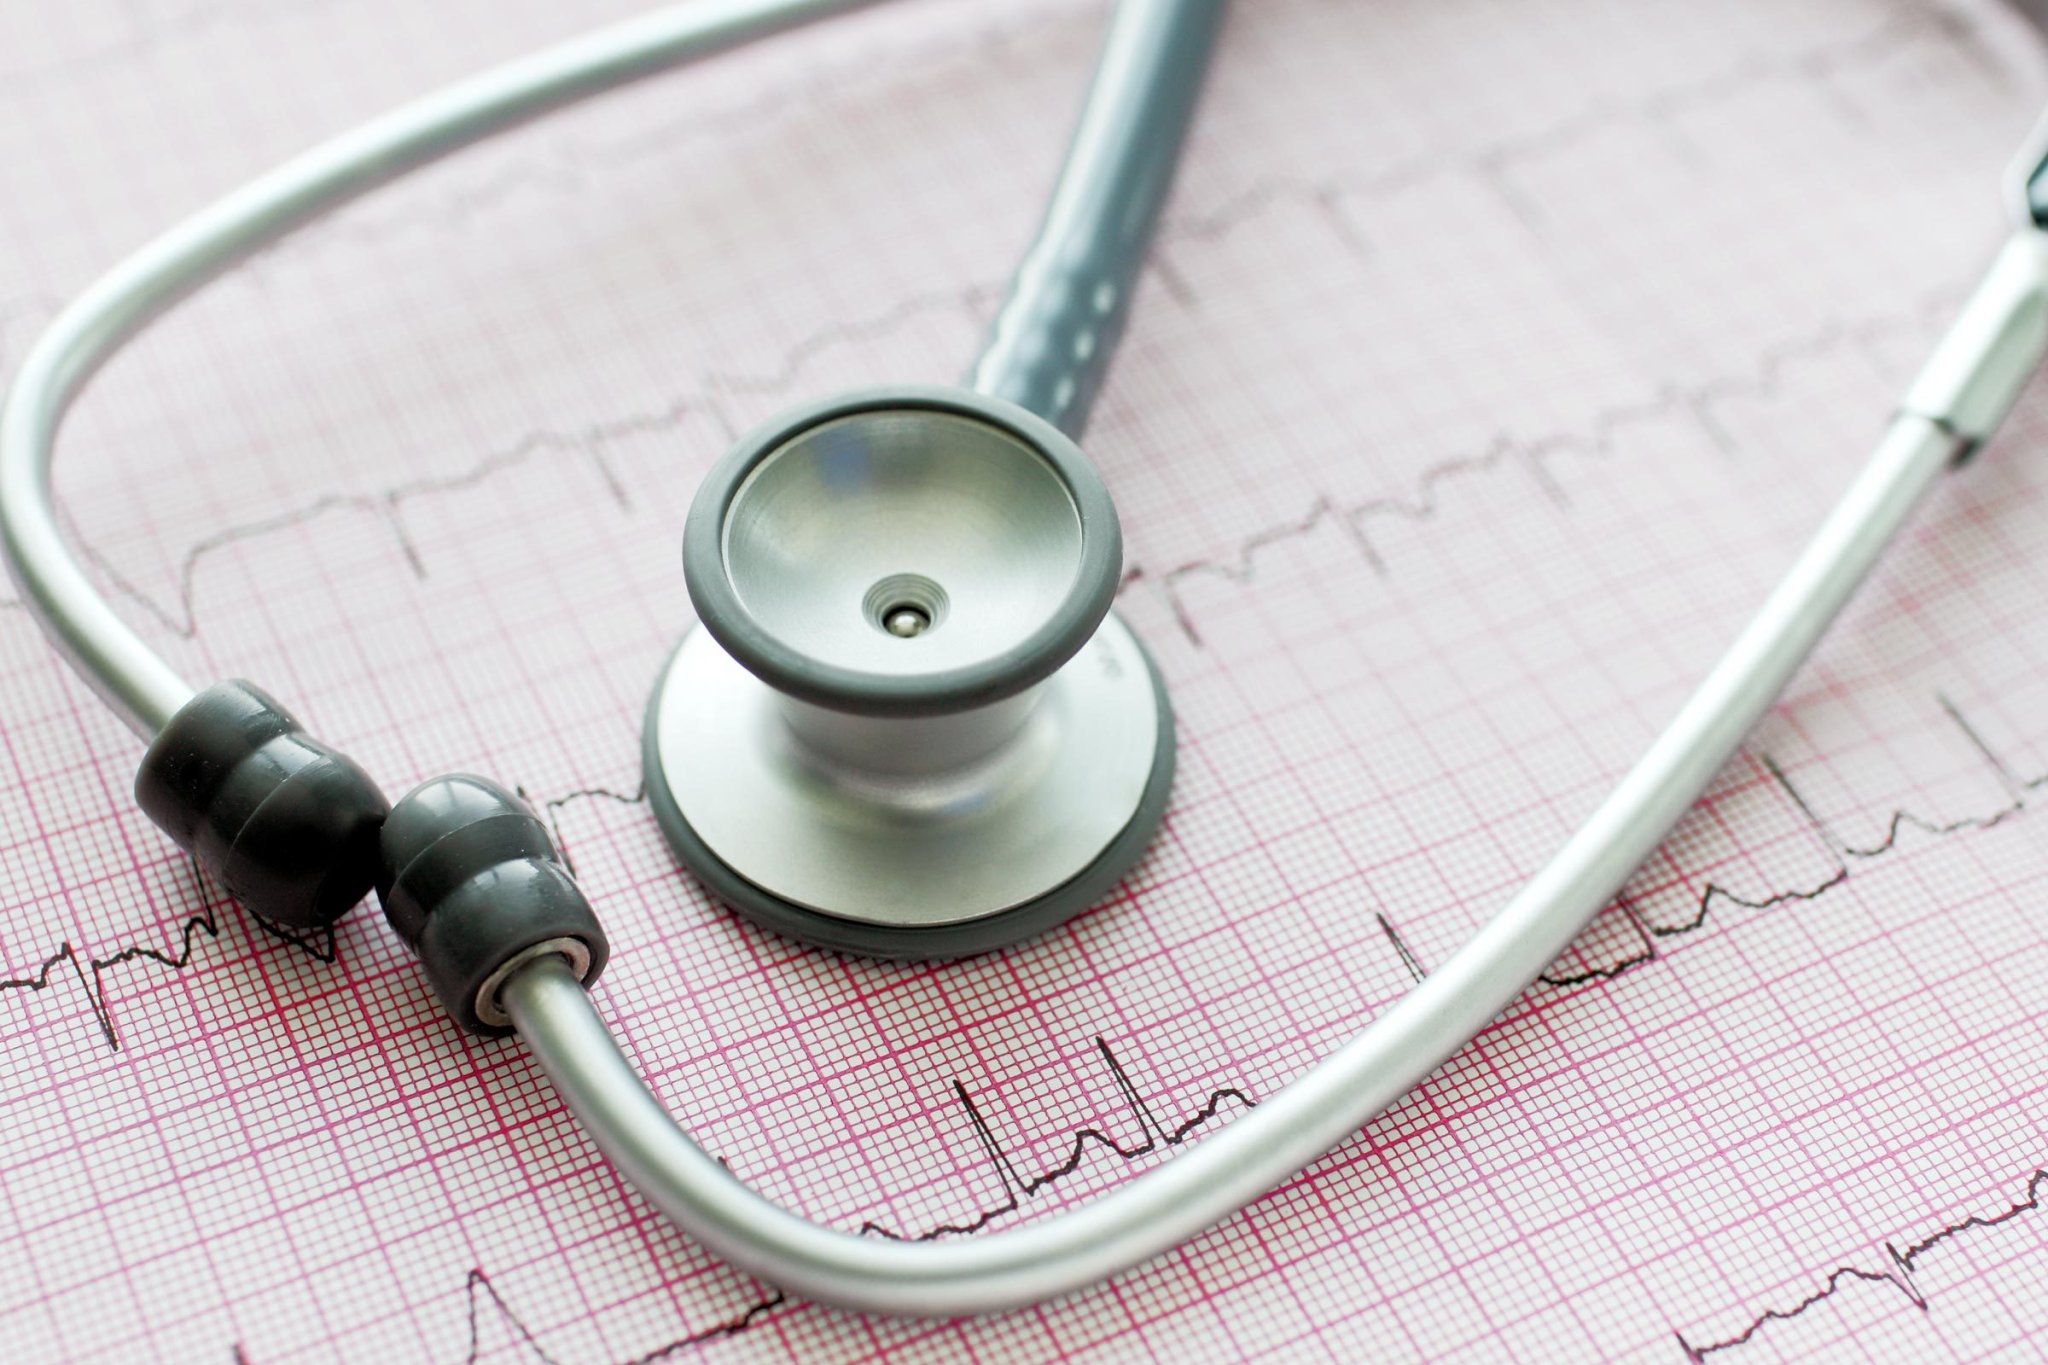 6 Silent Signs of AFib, According to a Cardiologist